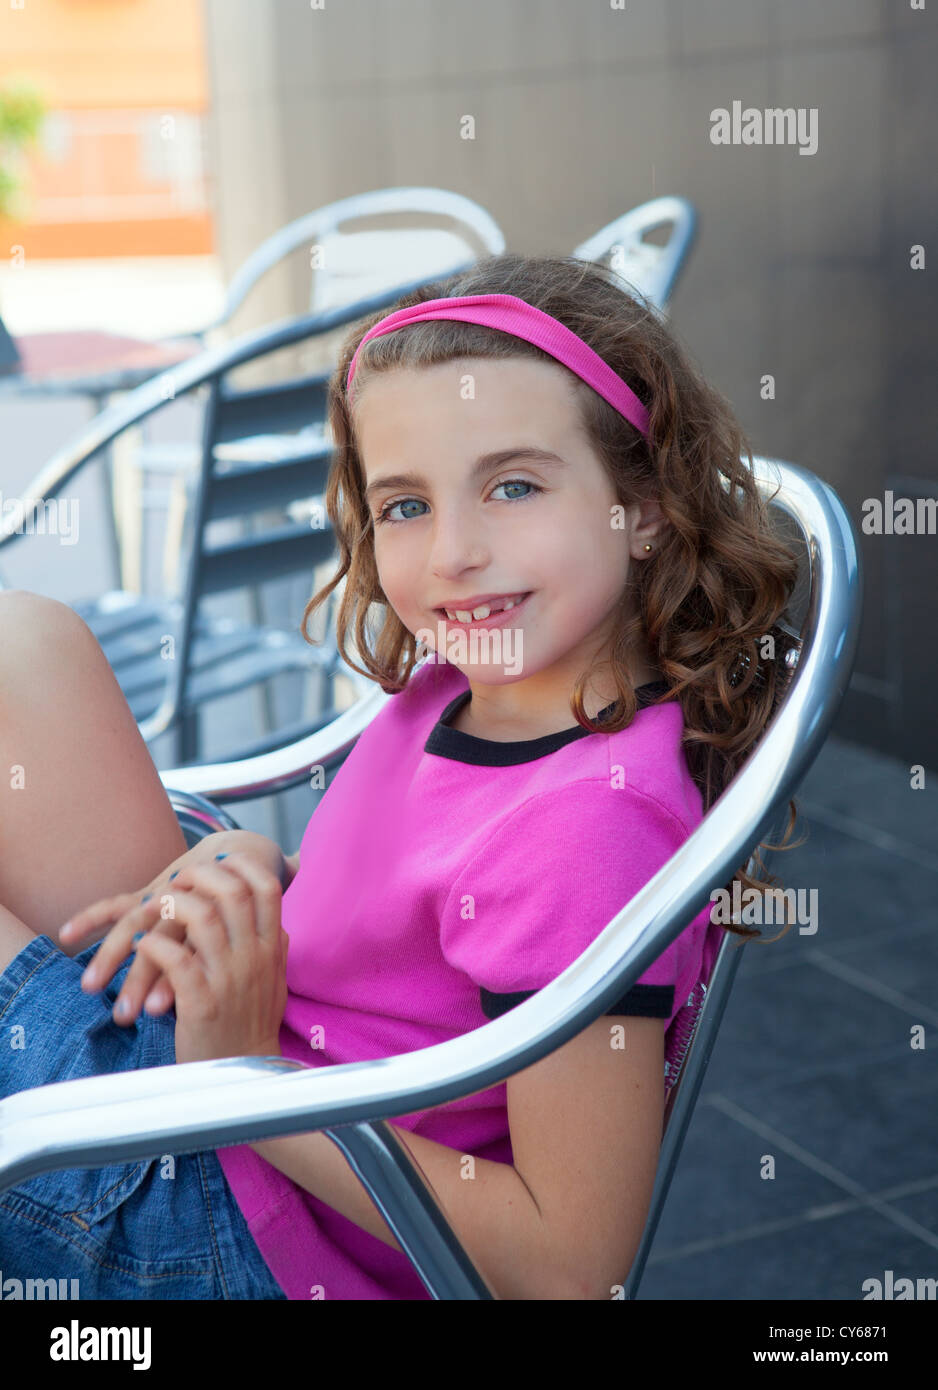 Smiling girl sitting in outdoor aluminium silver chair and pink t-shirt Stock Photo